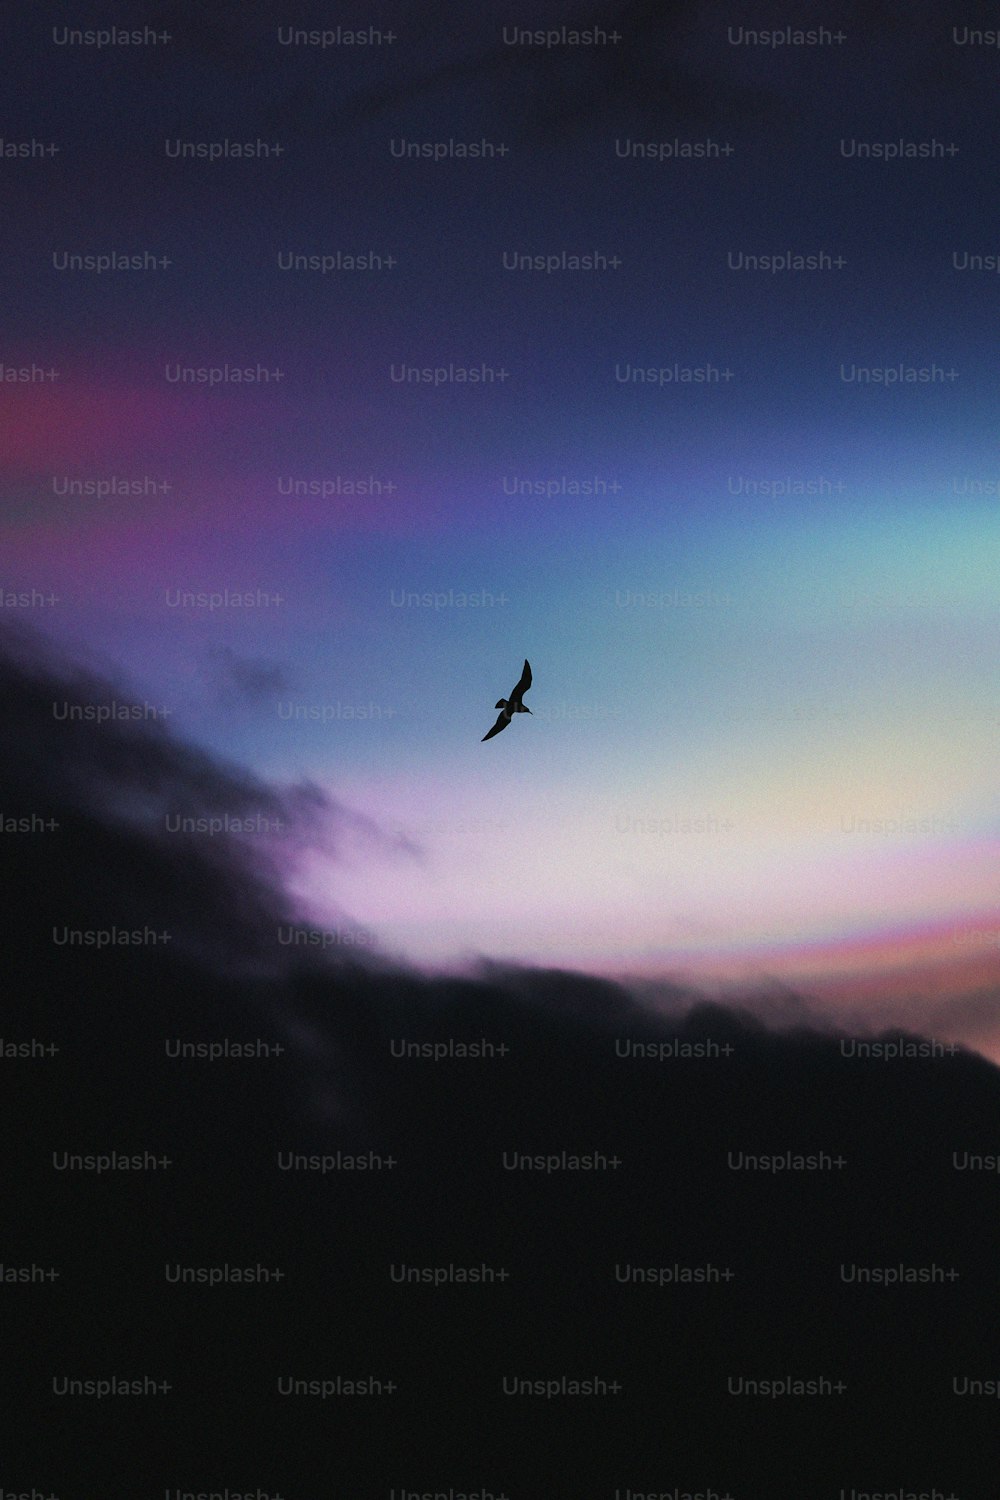 a bird flying in the sky with a rainbow in the background